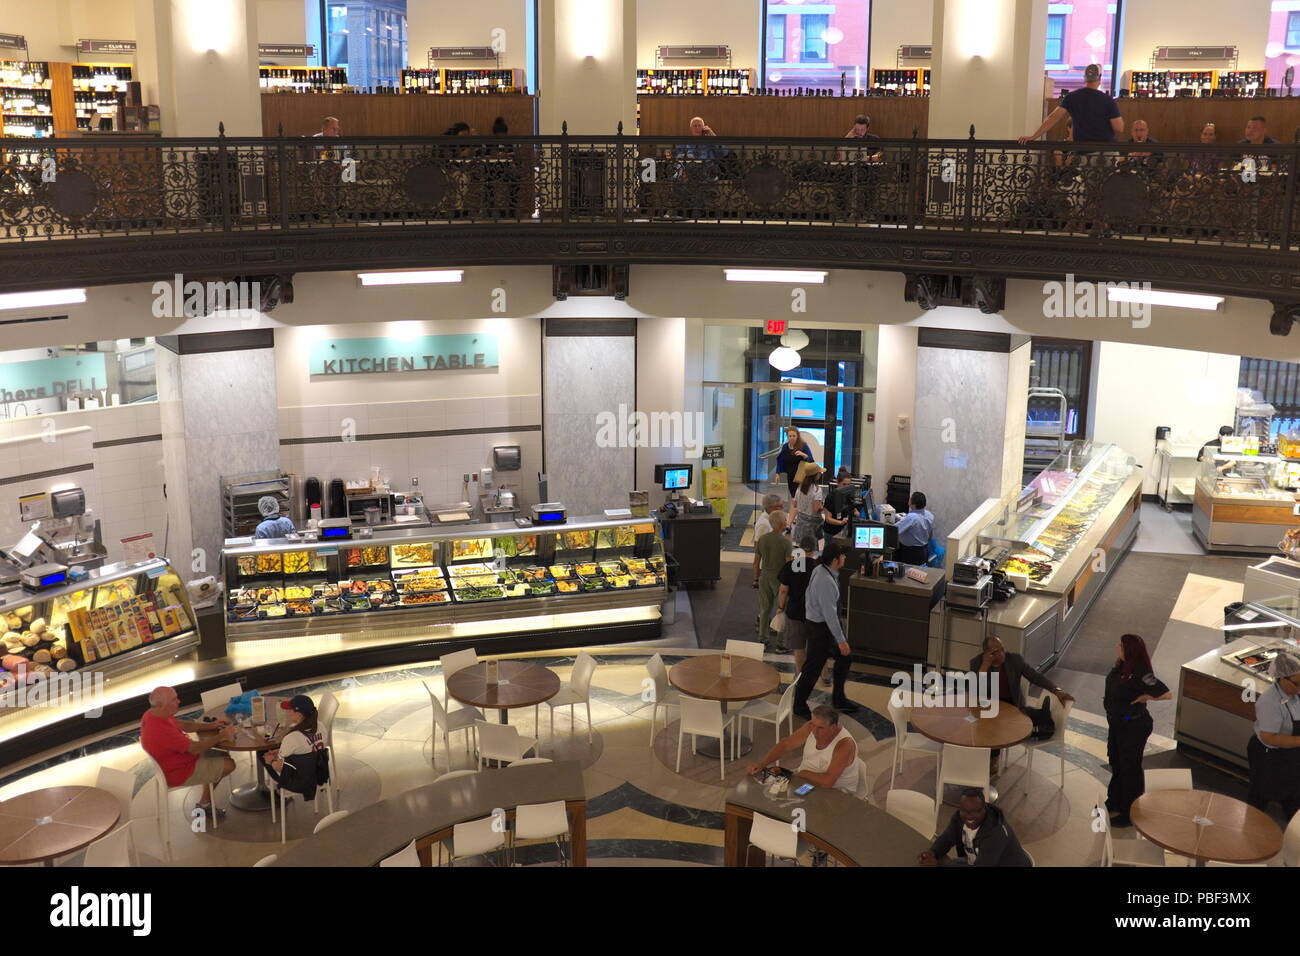 https://c8.alamy.com/comp/PBF3MX/heinens-grocery-store-in-downtown-cleveland-ohio-was-converted-from-a-bank-making-its-ambiance-decidely-unique-and-upscale-with-its-atrium-design-PBF3MX.jpg